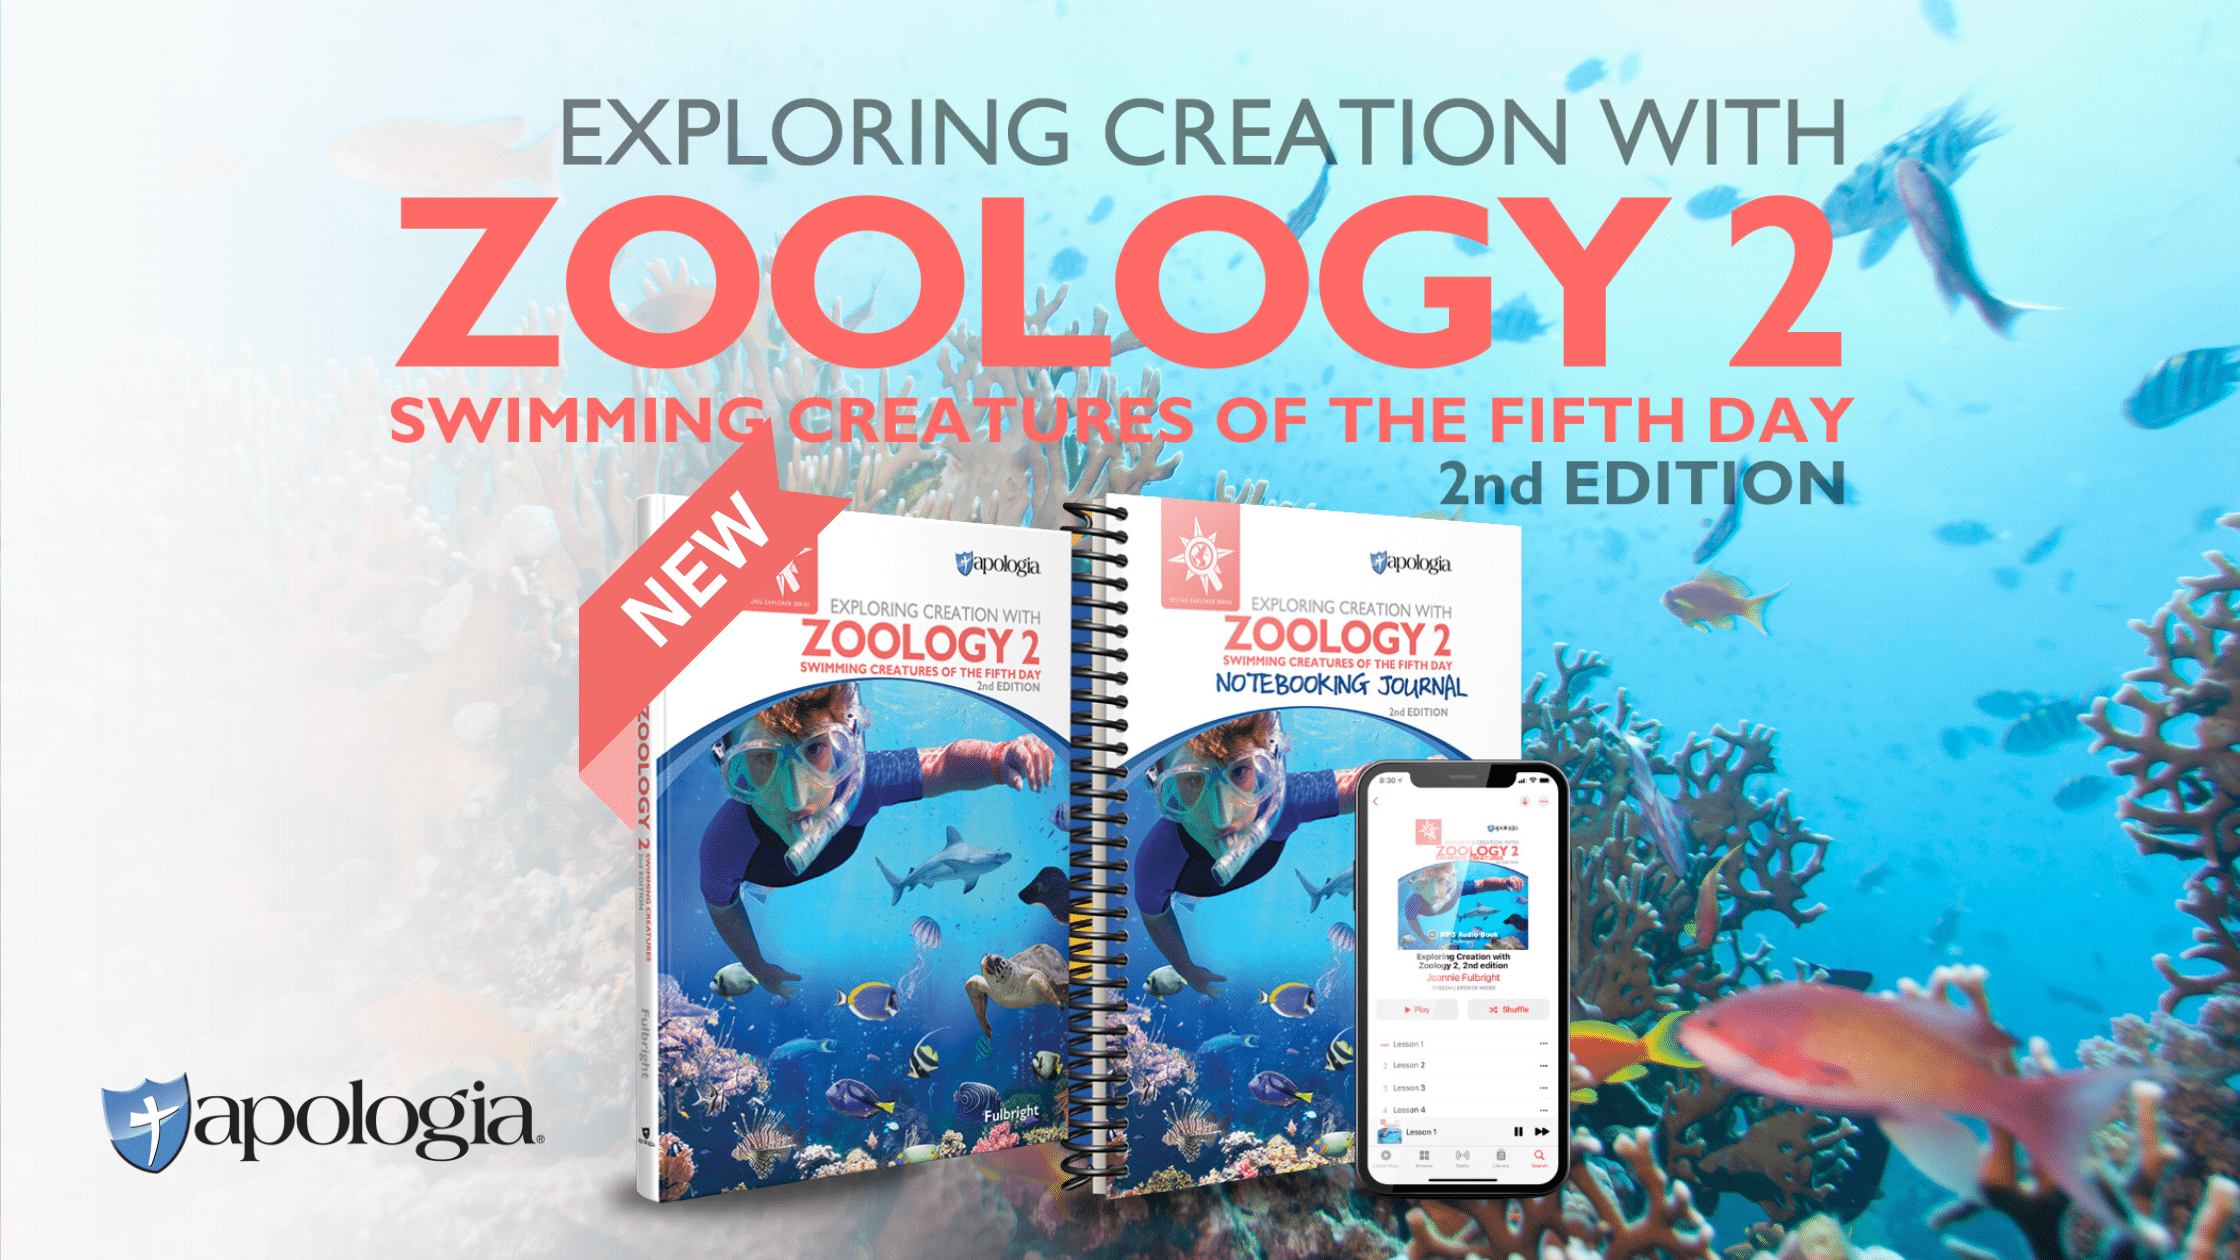 Exploring Creation with Zoology 2, 2nd Edition